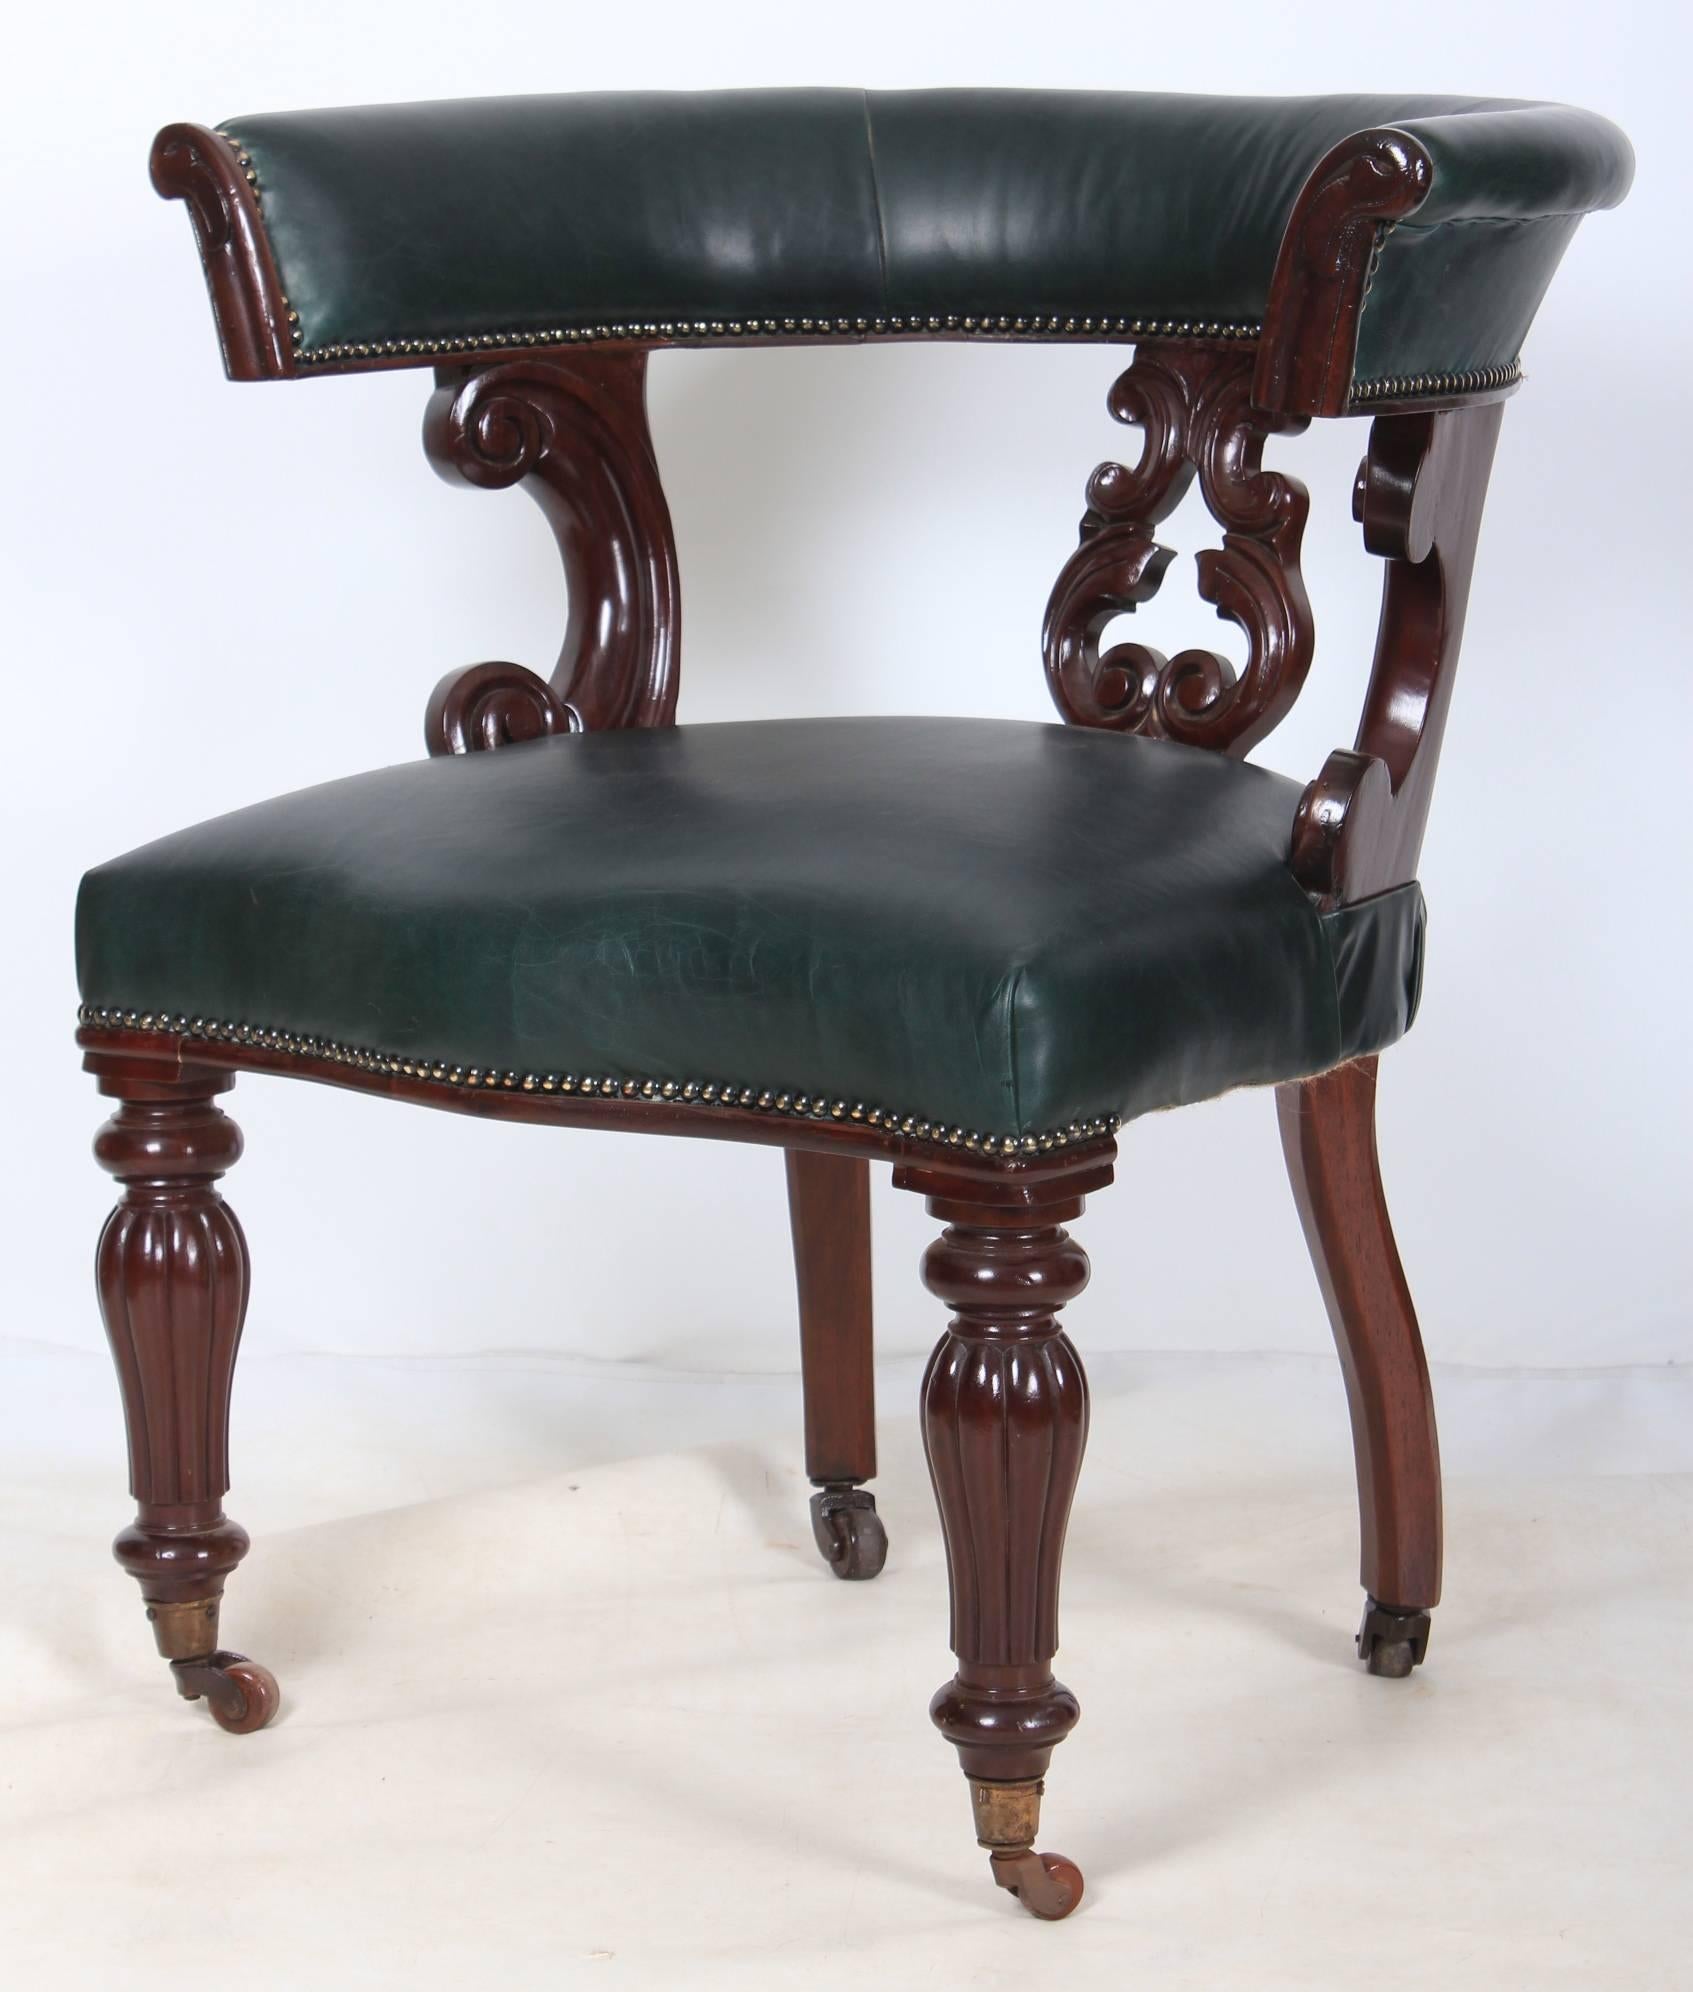 Victorian Mahogany and Leather Office Desk Chair 1